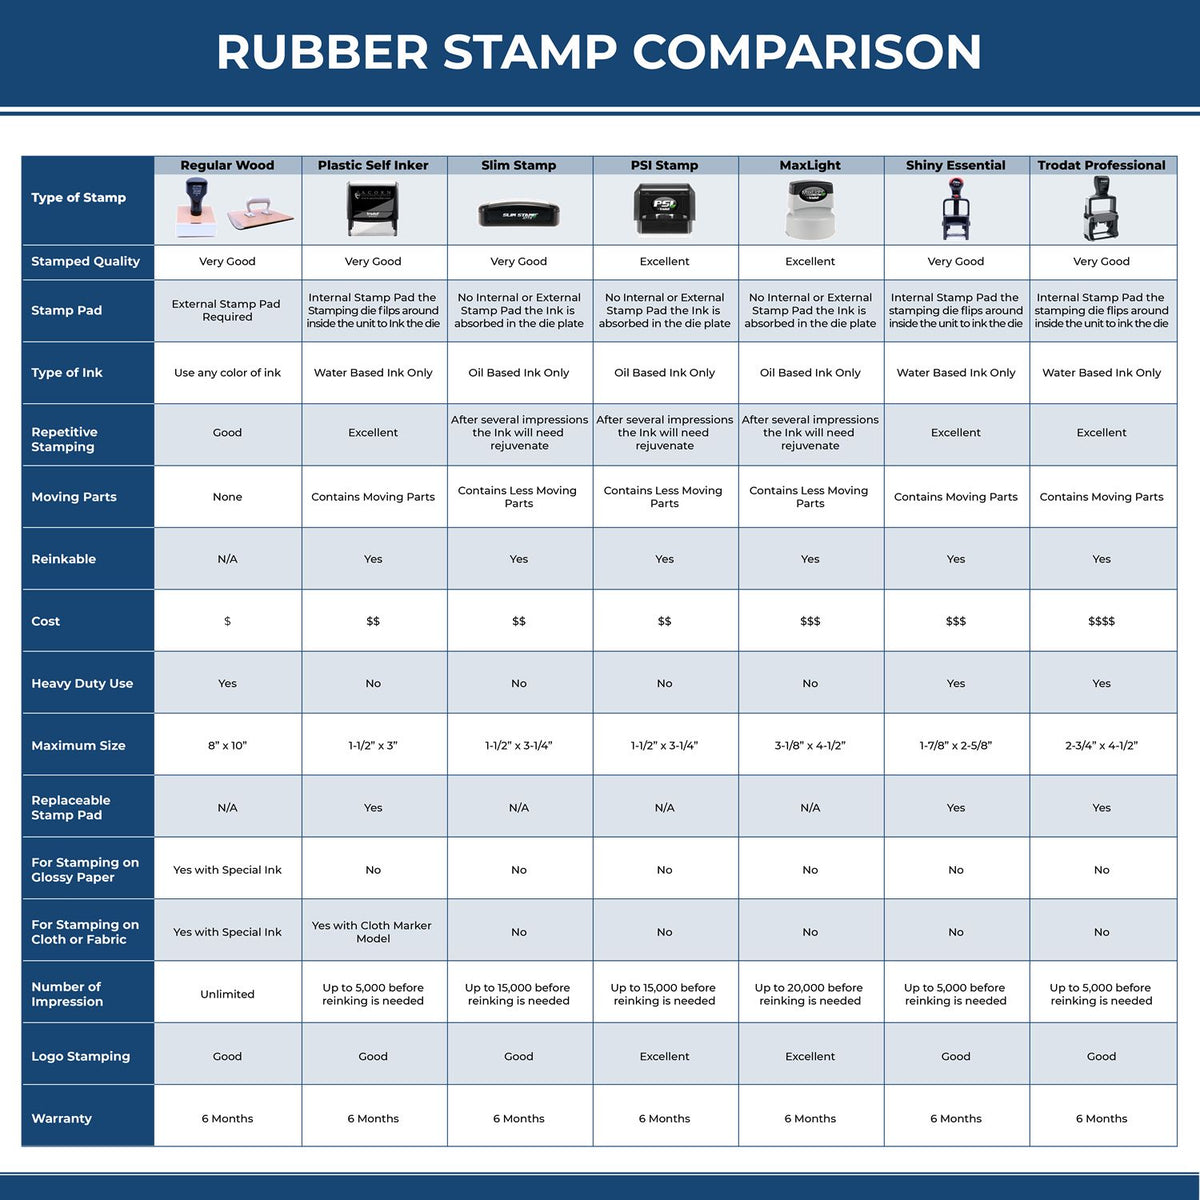 Large Self Inking Capitation Stamp 4537S Rubber Stamp Comparison